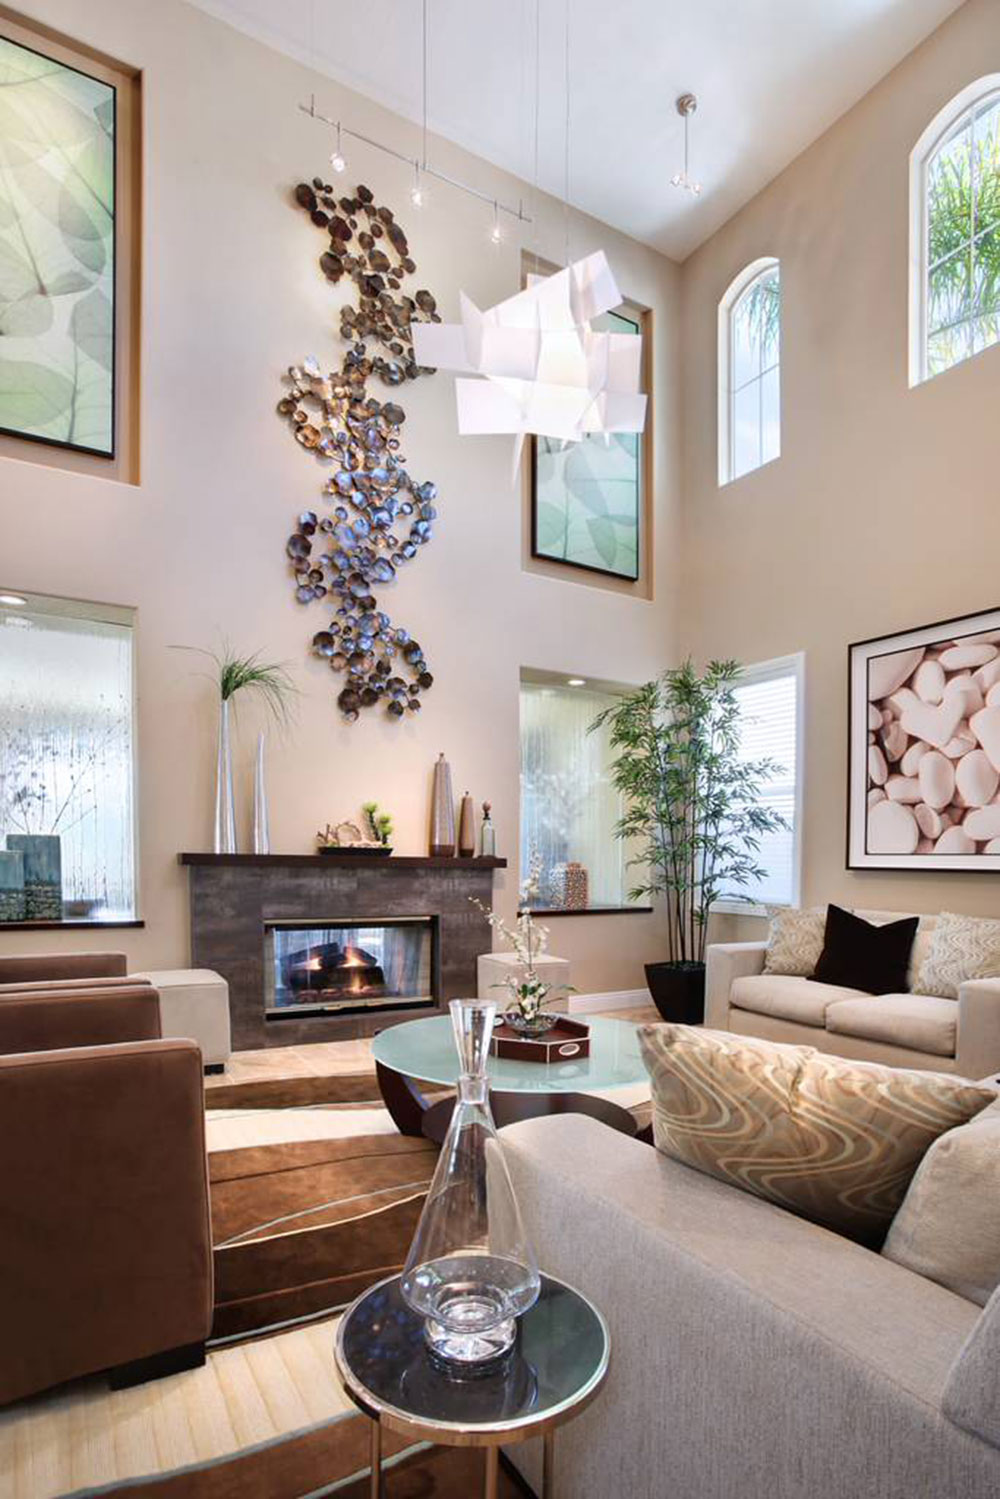 Decorating Living Room With High Ceilings | www.cintronbeveragegroup.com